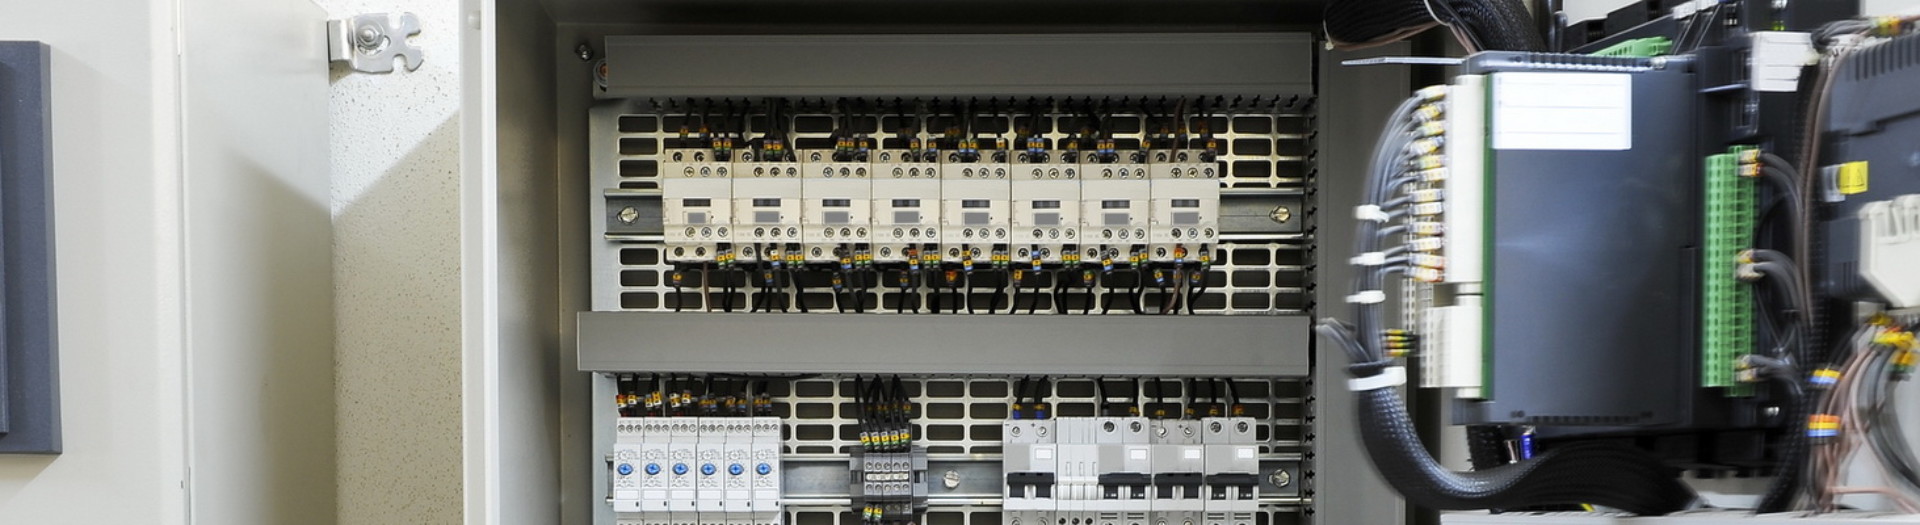 an Industrial electrical control panel